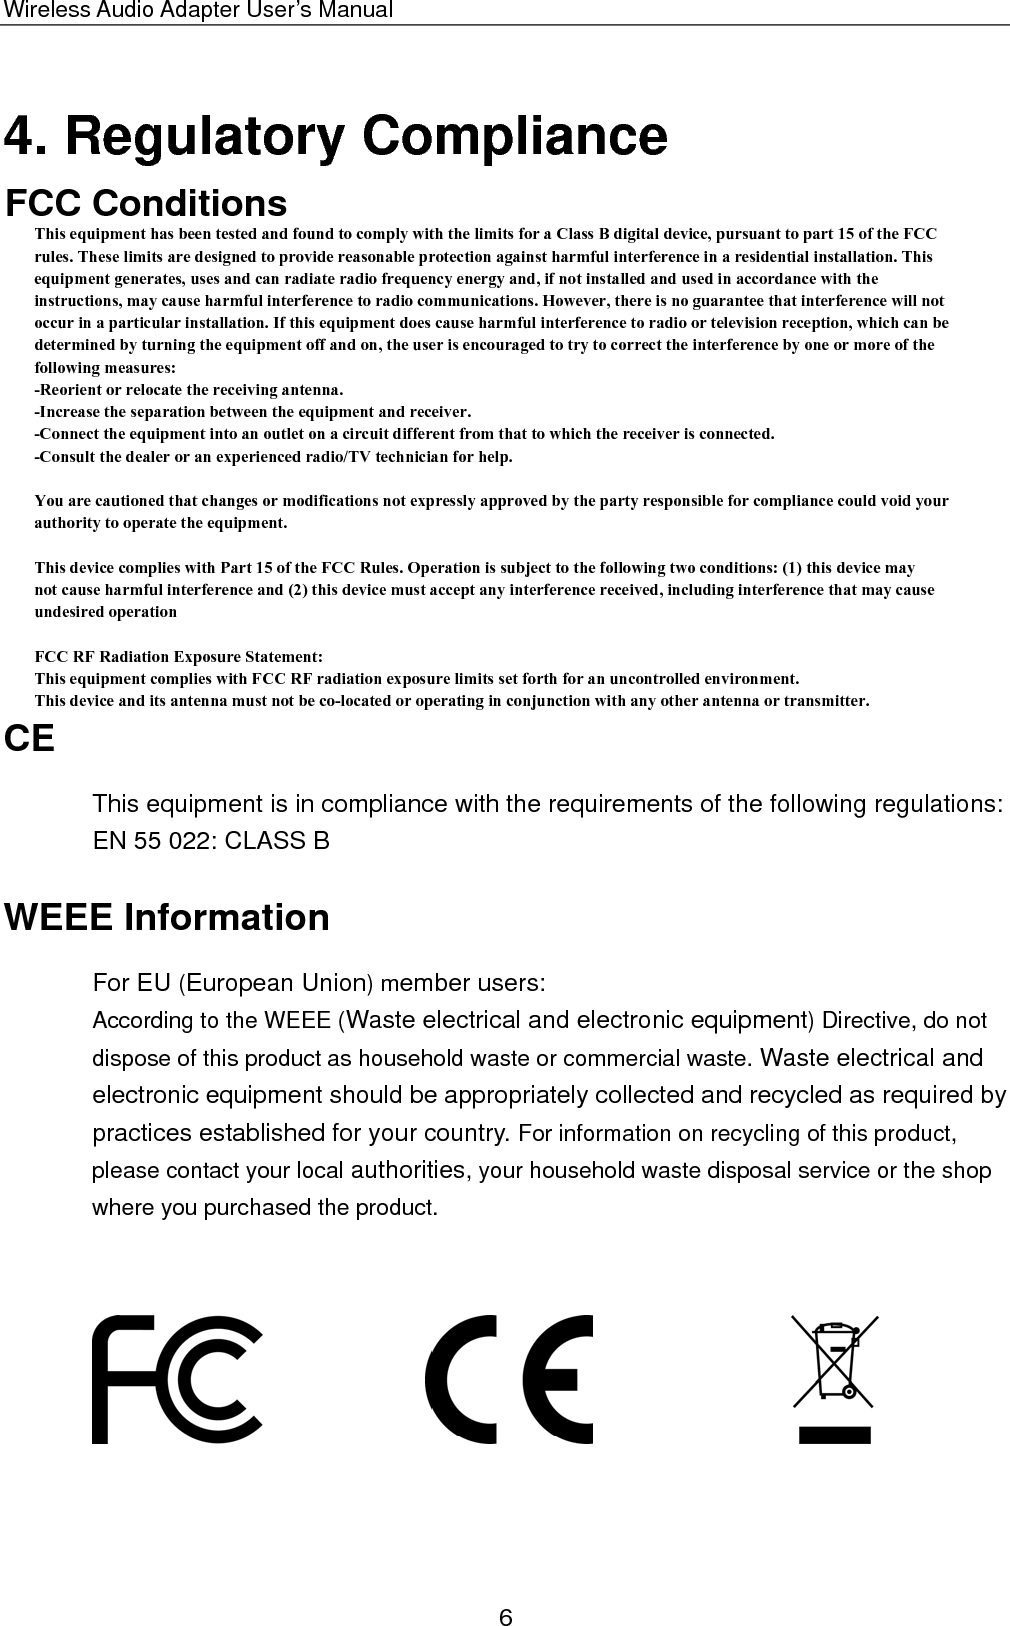 Wireless Audio Adapter User’s Manual 4. Regulatory Compliance FCC Conditions  CE This equipment is in compliance with the requirements of the following regulations: EN 55 022: CLASS B WEEE Information For EU (European Union) member users:   According to the WEEE (Waste electrical and electronic equipment) Directive, do not dispose of this product as household waste or commercial waste. Waste electrical and electronic equipment should be appropriately collected and recycled as required by practices established for your country. For information on recycling of this product, please contact your local authorities, your household waste disposal service or the shop where you purchased the product.                                6 This equipment has been tested and found to comply with the limits for a Class B digital device, pursuant to part 15 of the FCCrules. These limits are designed to provide reasonable protection against harmful interference in a residential installation. Thisequipment generates, uses and can radiate radio frequency energy and, if not installed and used in accordance with theinstructions, may cause harmful interference to radio communications. However, there is no guarantee that interference will notoccur in a particular installation. If this equipment does cause harmful interference to radio or television reception, which can bedetermined by turning the equipment off and on, the user is encouraged to try to correct the interference by one or more of thefollowing measures:-Reorient or relocate the receiving antenna.-Increase the separation between the equipment and receiver.-Connect the equipment into an outlet on a circuit different from that to which the receiver is connected.-Consult the dealer or an experienced radio/TV technician for help.You are cautioned that changes or modifications not expressly approved by the party responsible for compliance could void yourauthority to operate the equipment.This device complies with Part 15 of the FCC Rules. Operation is subject to the following two conditions: (1) this device maynot cause harmful interference and (2) this device must accept any interference received, including interference that may causeundesired operationFCC RF Radiation Exposure Statement: This equipment complies with FCC RF radiation exposure limits set forth for an uncontrolled environment. This device and its antenna must not be co-located or operating in conjunction with any other antenna or transmitter.